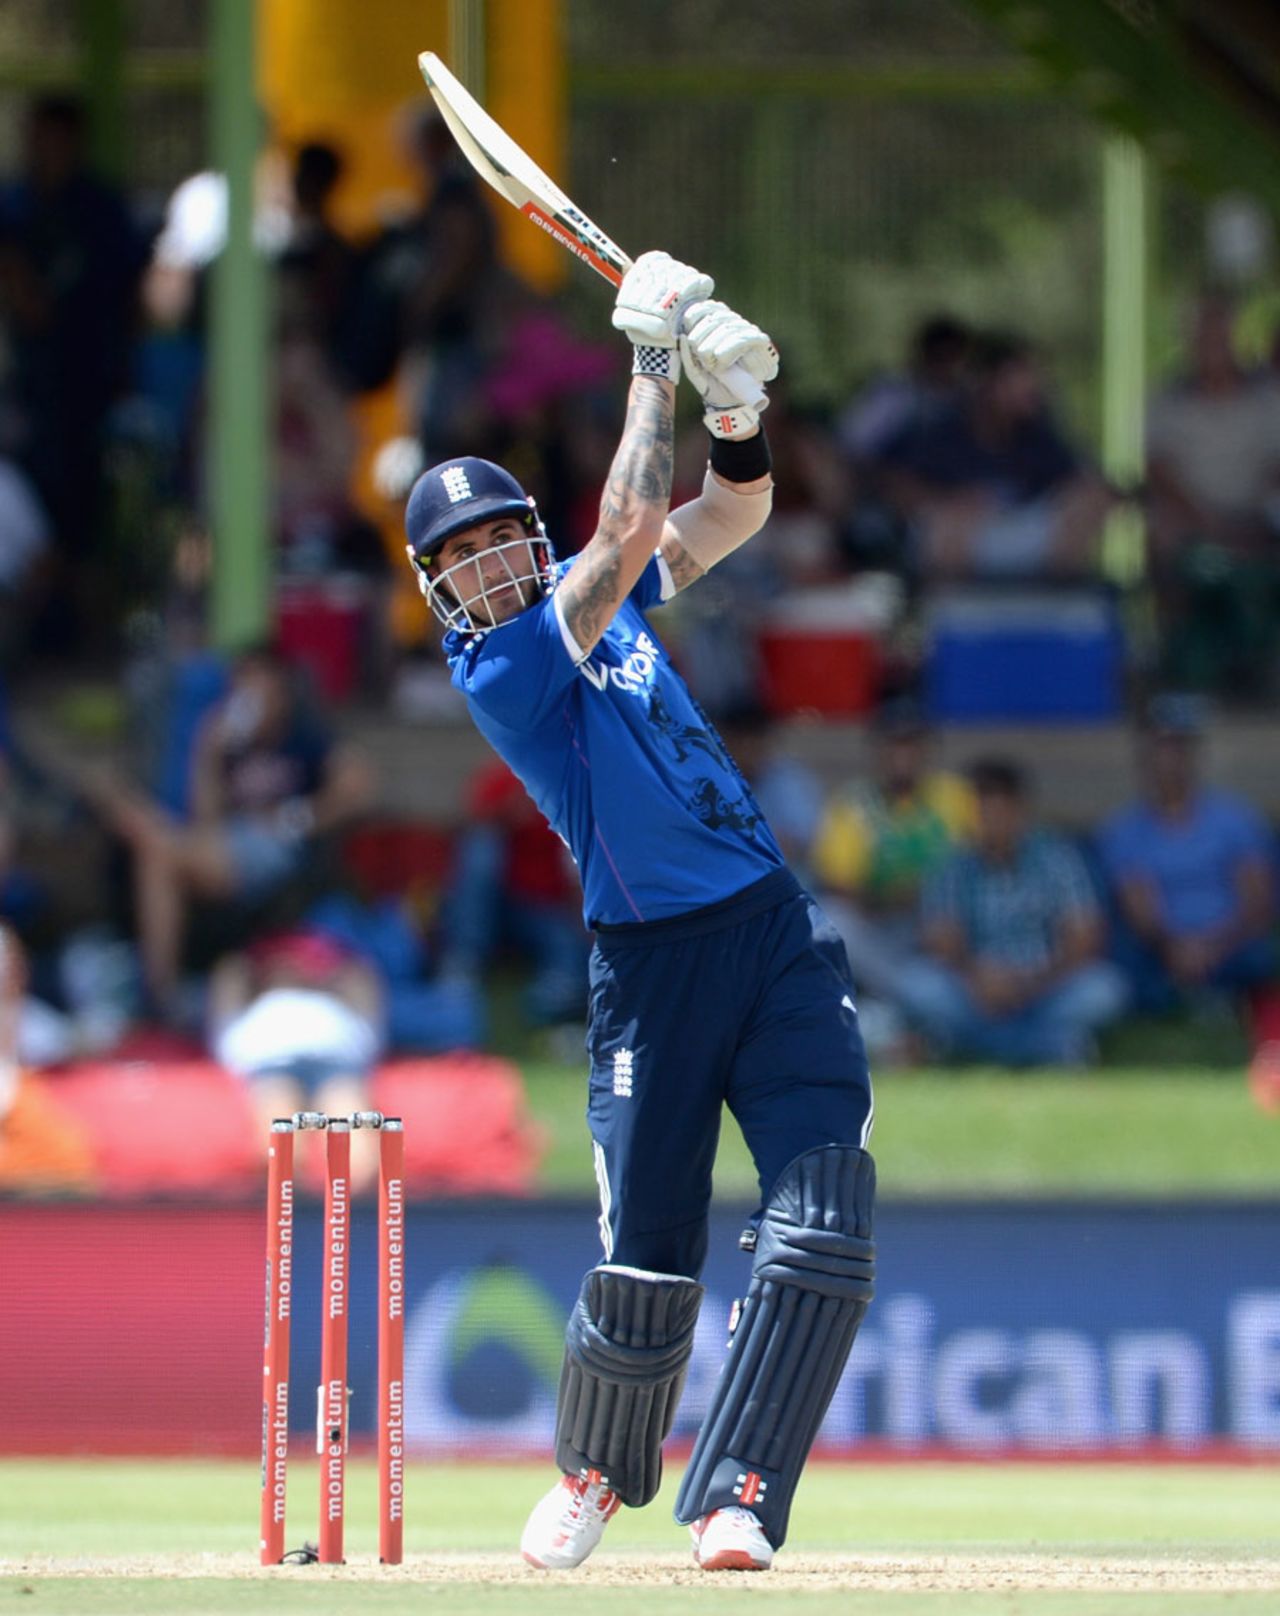 Alex Hales found some form with 57 off 47 balls, South Africa v England, 1st ODI, Bloemfontein, February 3, 2016